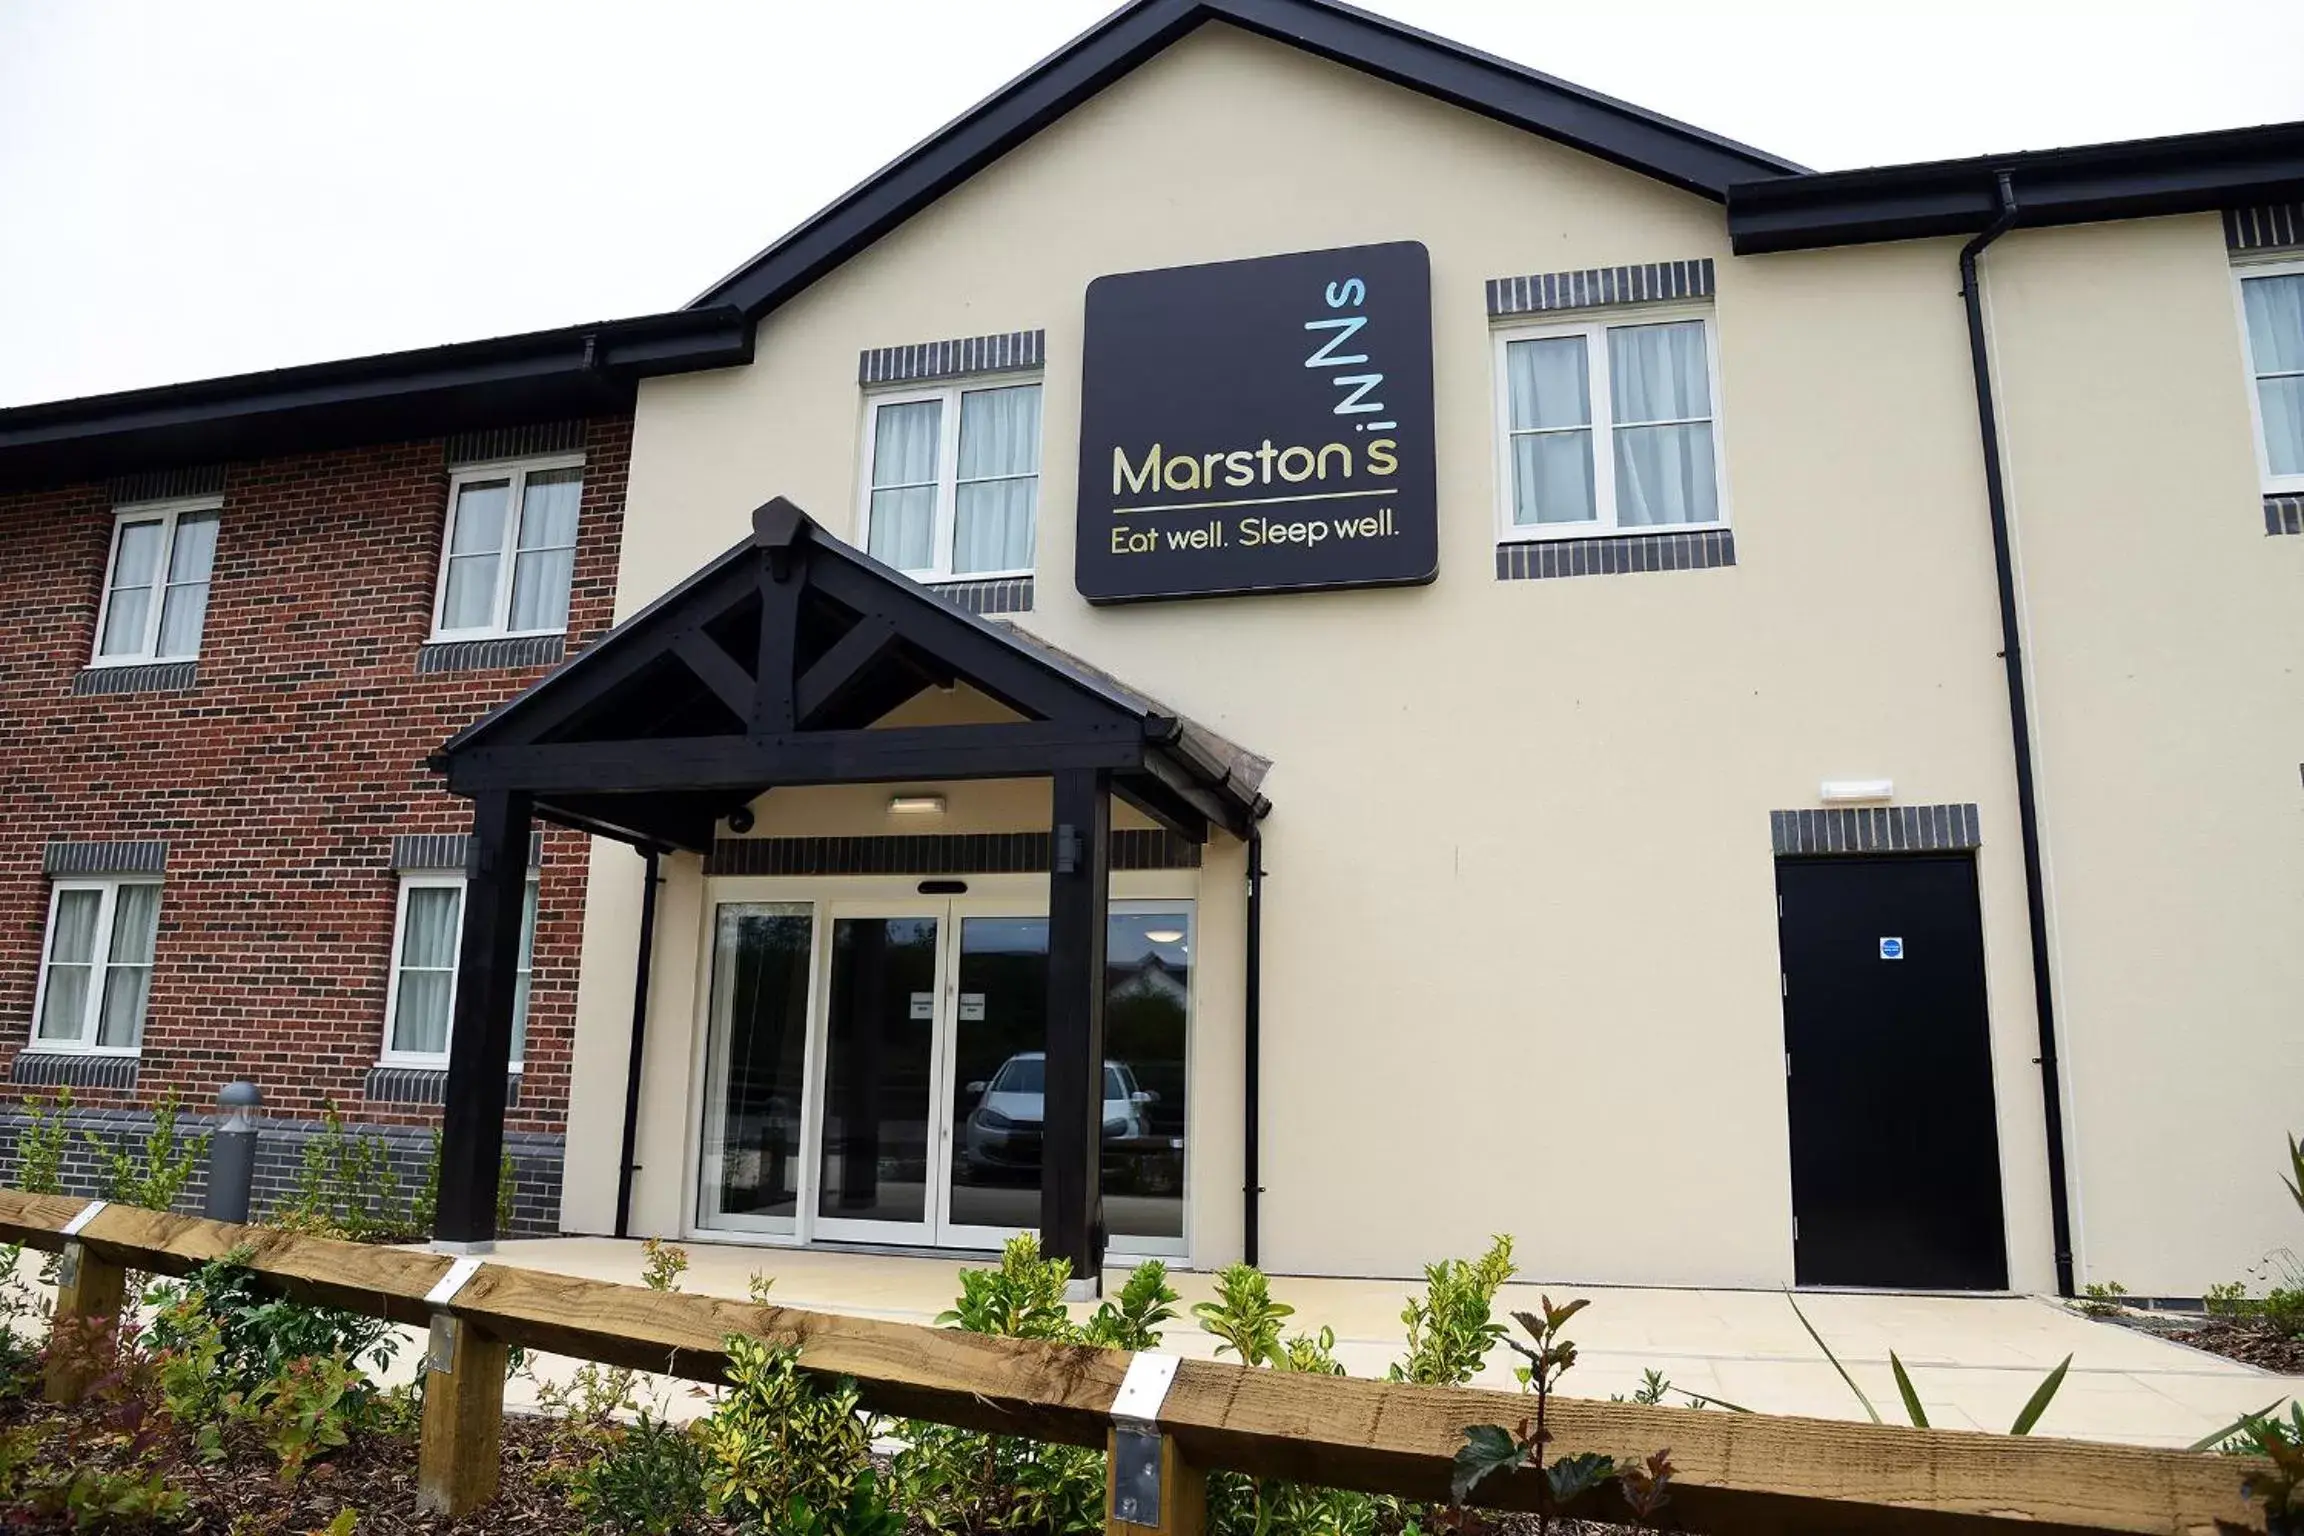 Facade/entrance, Property Building in Lock Keeper, Worksop by Marston's Inns